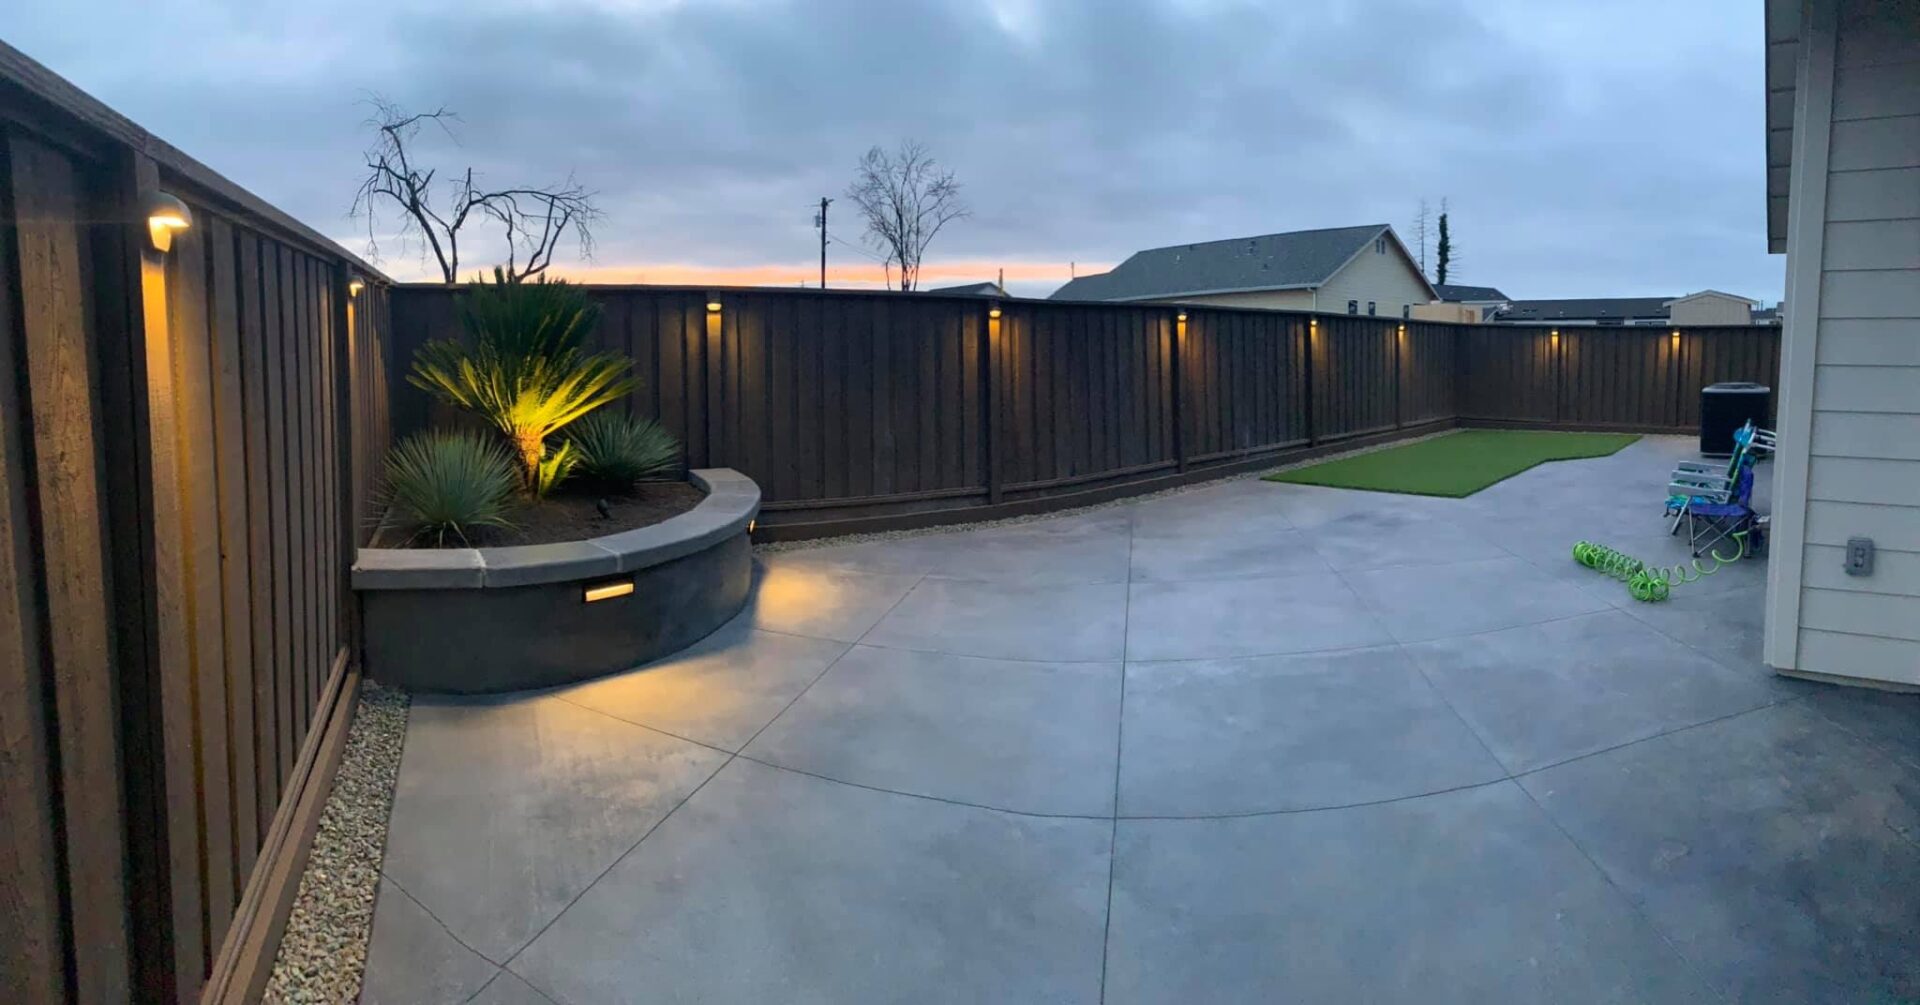 landscape lighting project by Guys Yard Design in Sonoma, CA